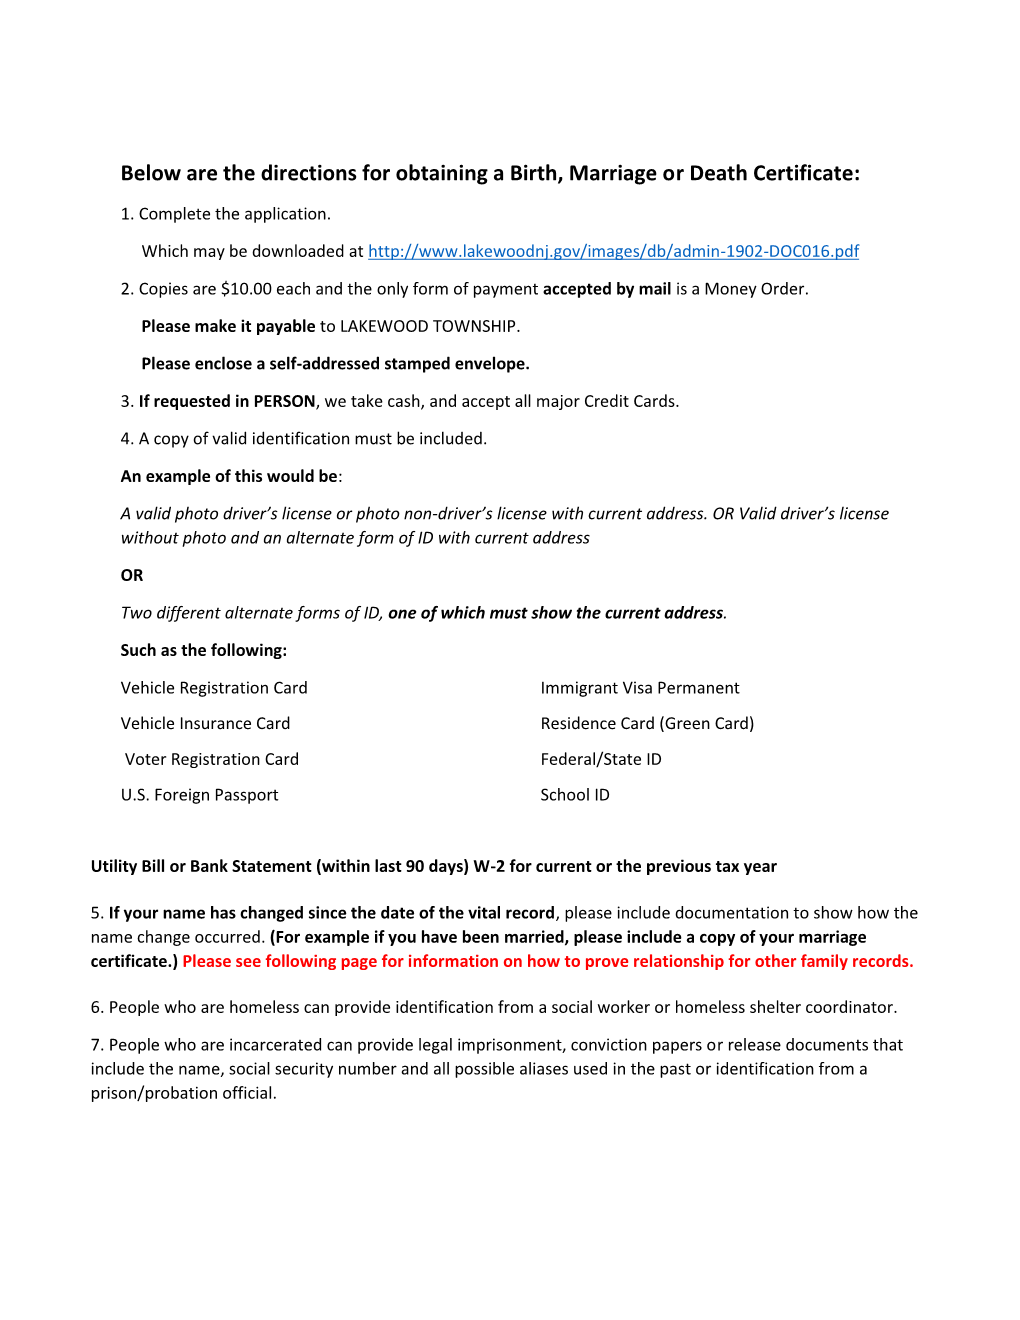 Below Are the Directions for Obtaining a Birth, Marriage Or Death Certificate